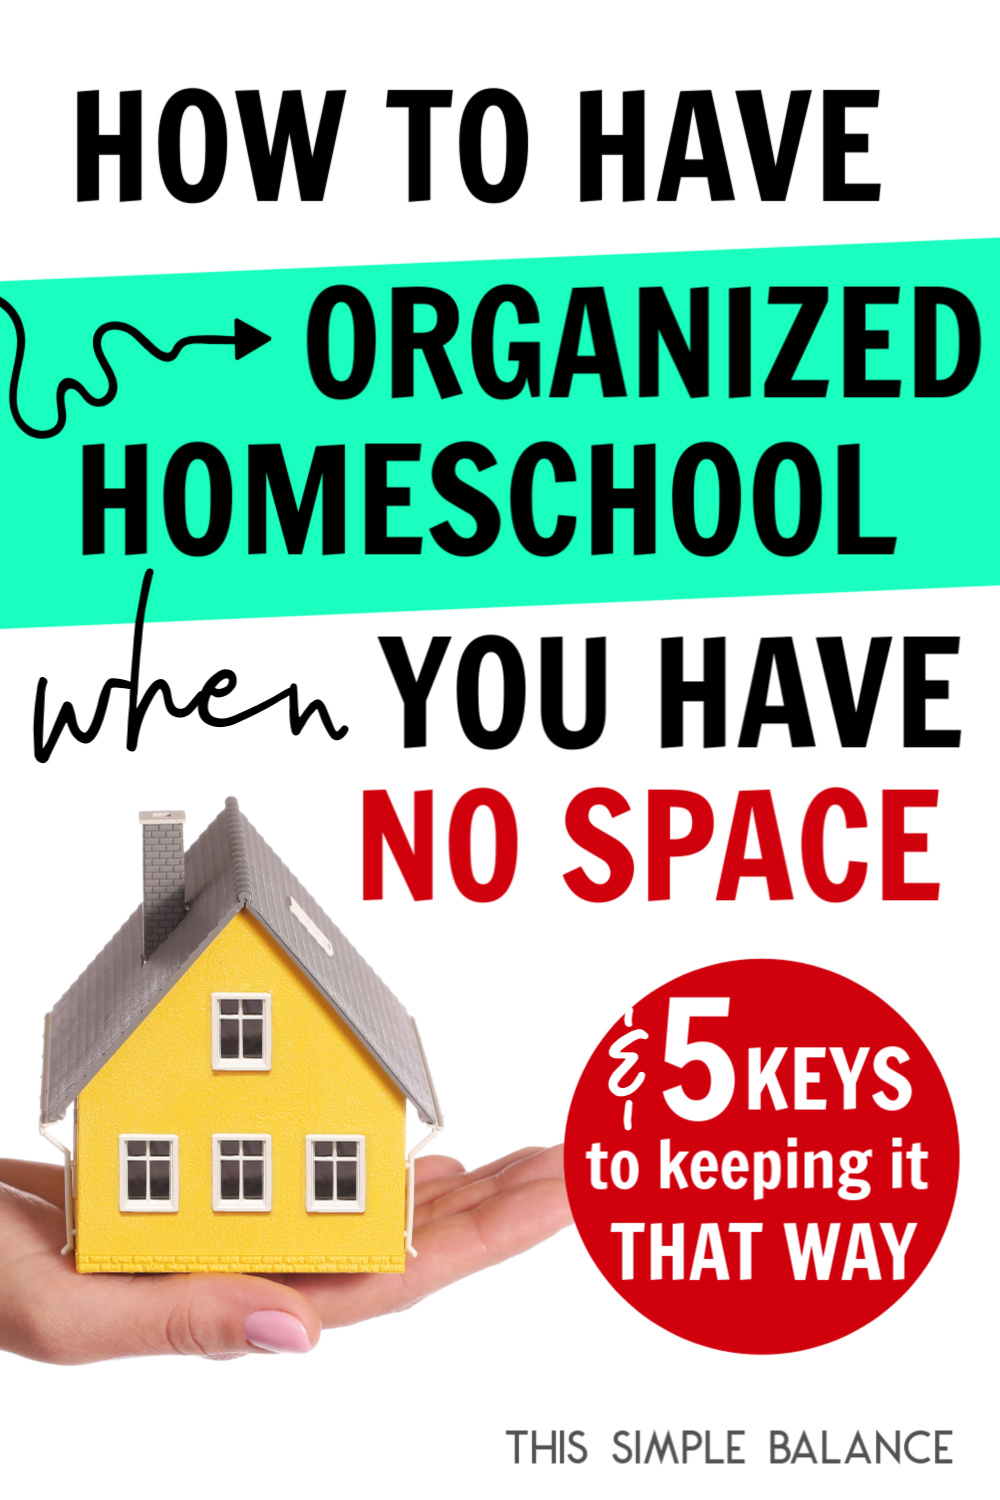 miniature house in palm of hand, with text, "how to have an organized homeschool when you have no space & 5 keys to keeping it that way"